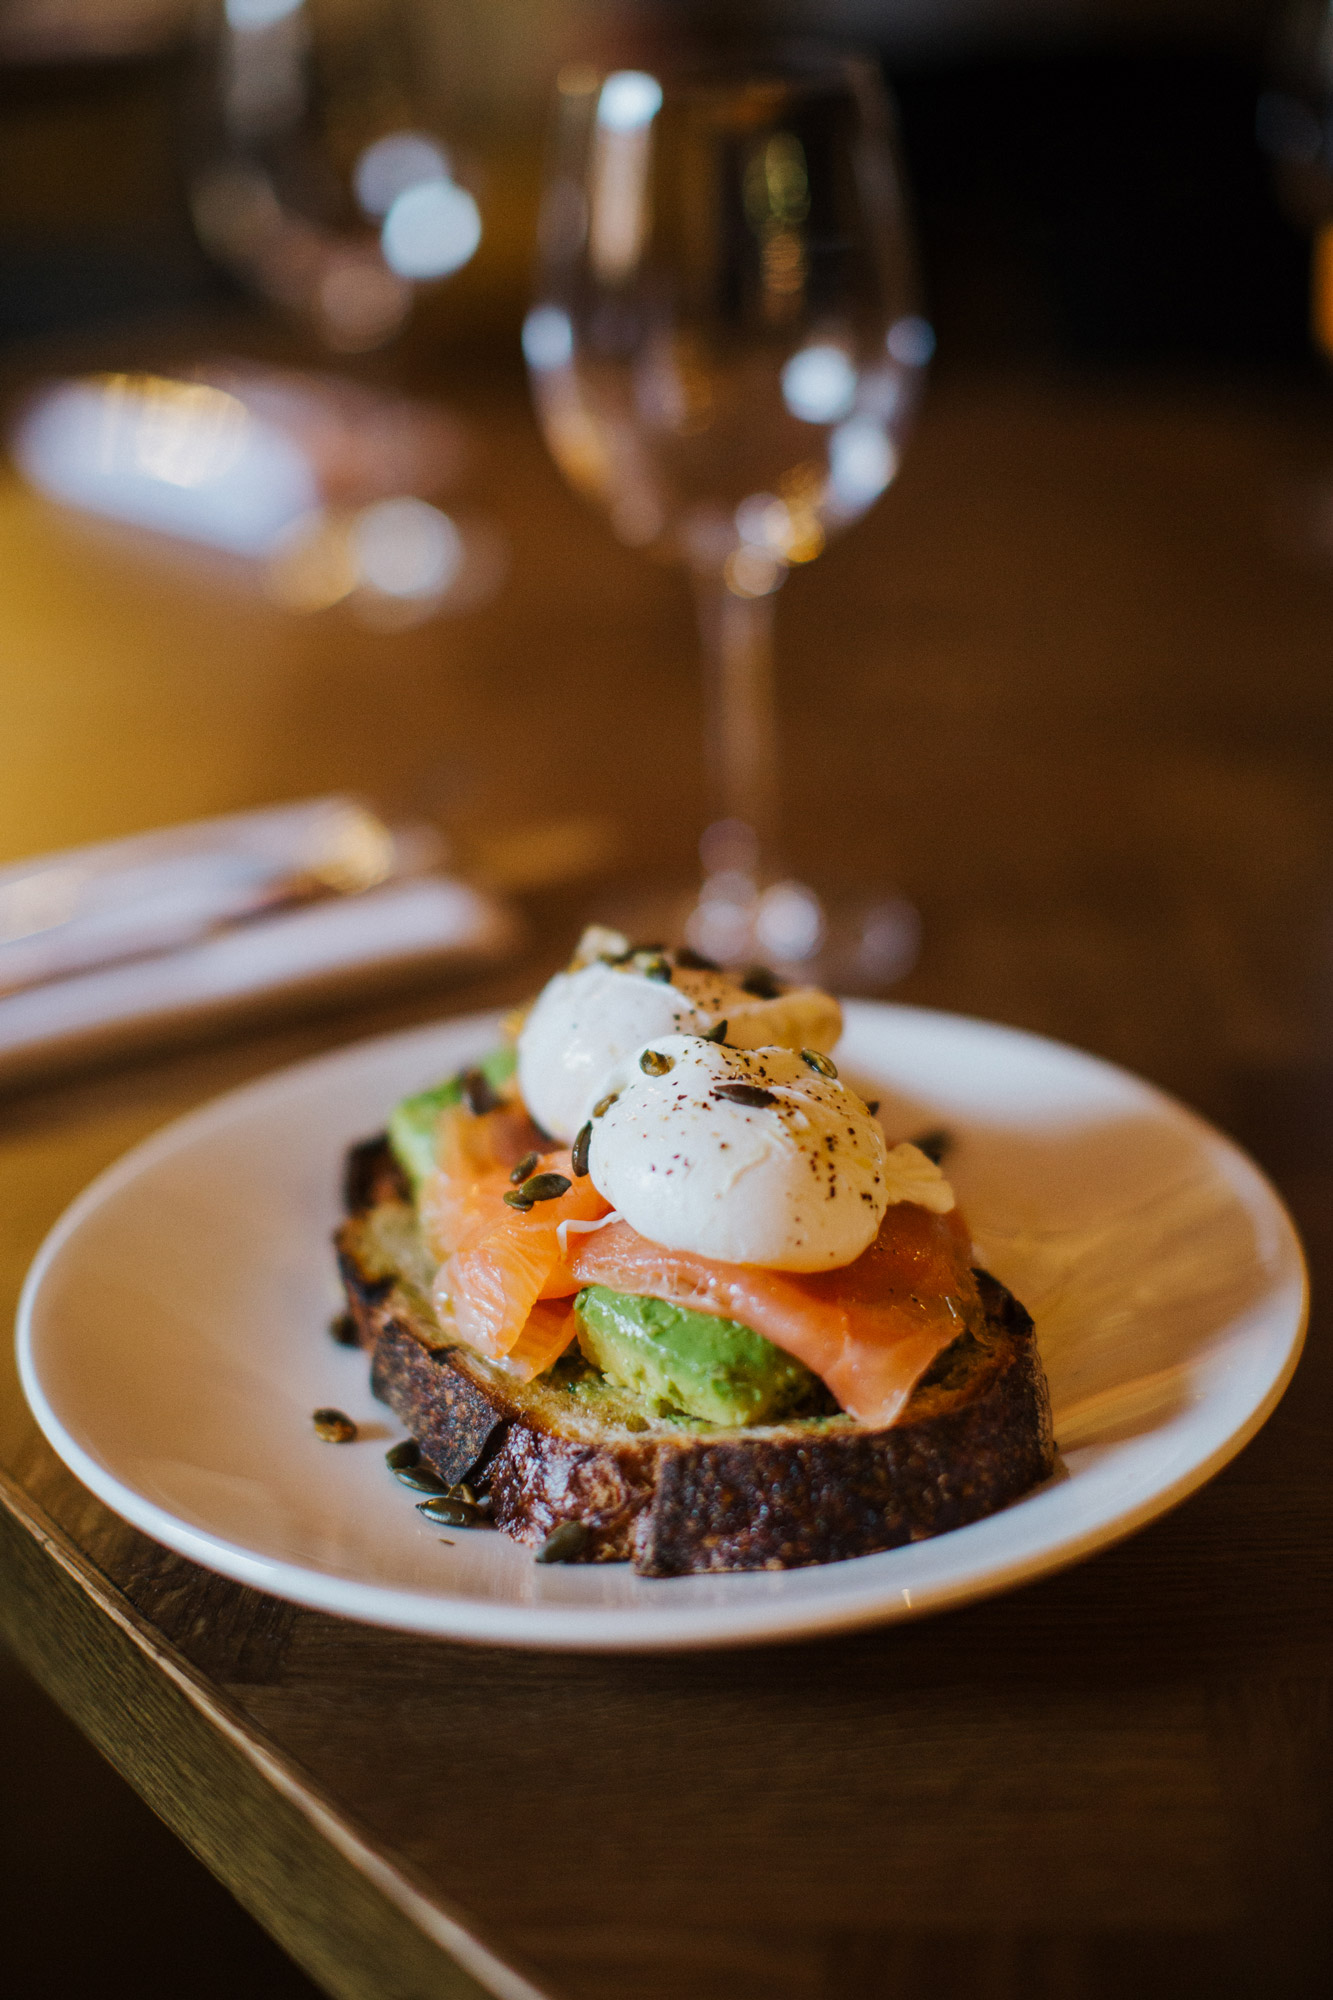 Poached Eggs with Avocado and Salmon from the brunch menu at The Globe pub and restaurant in Warwick.jpg